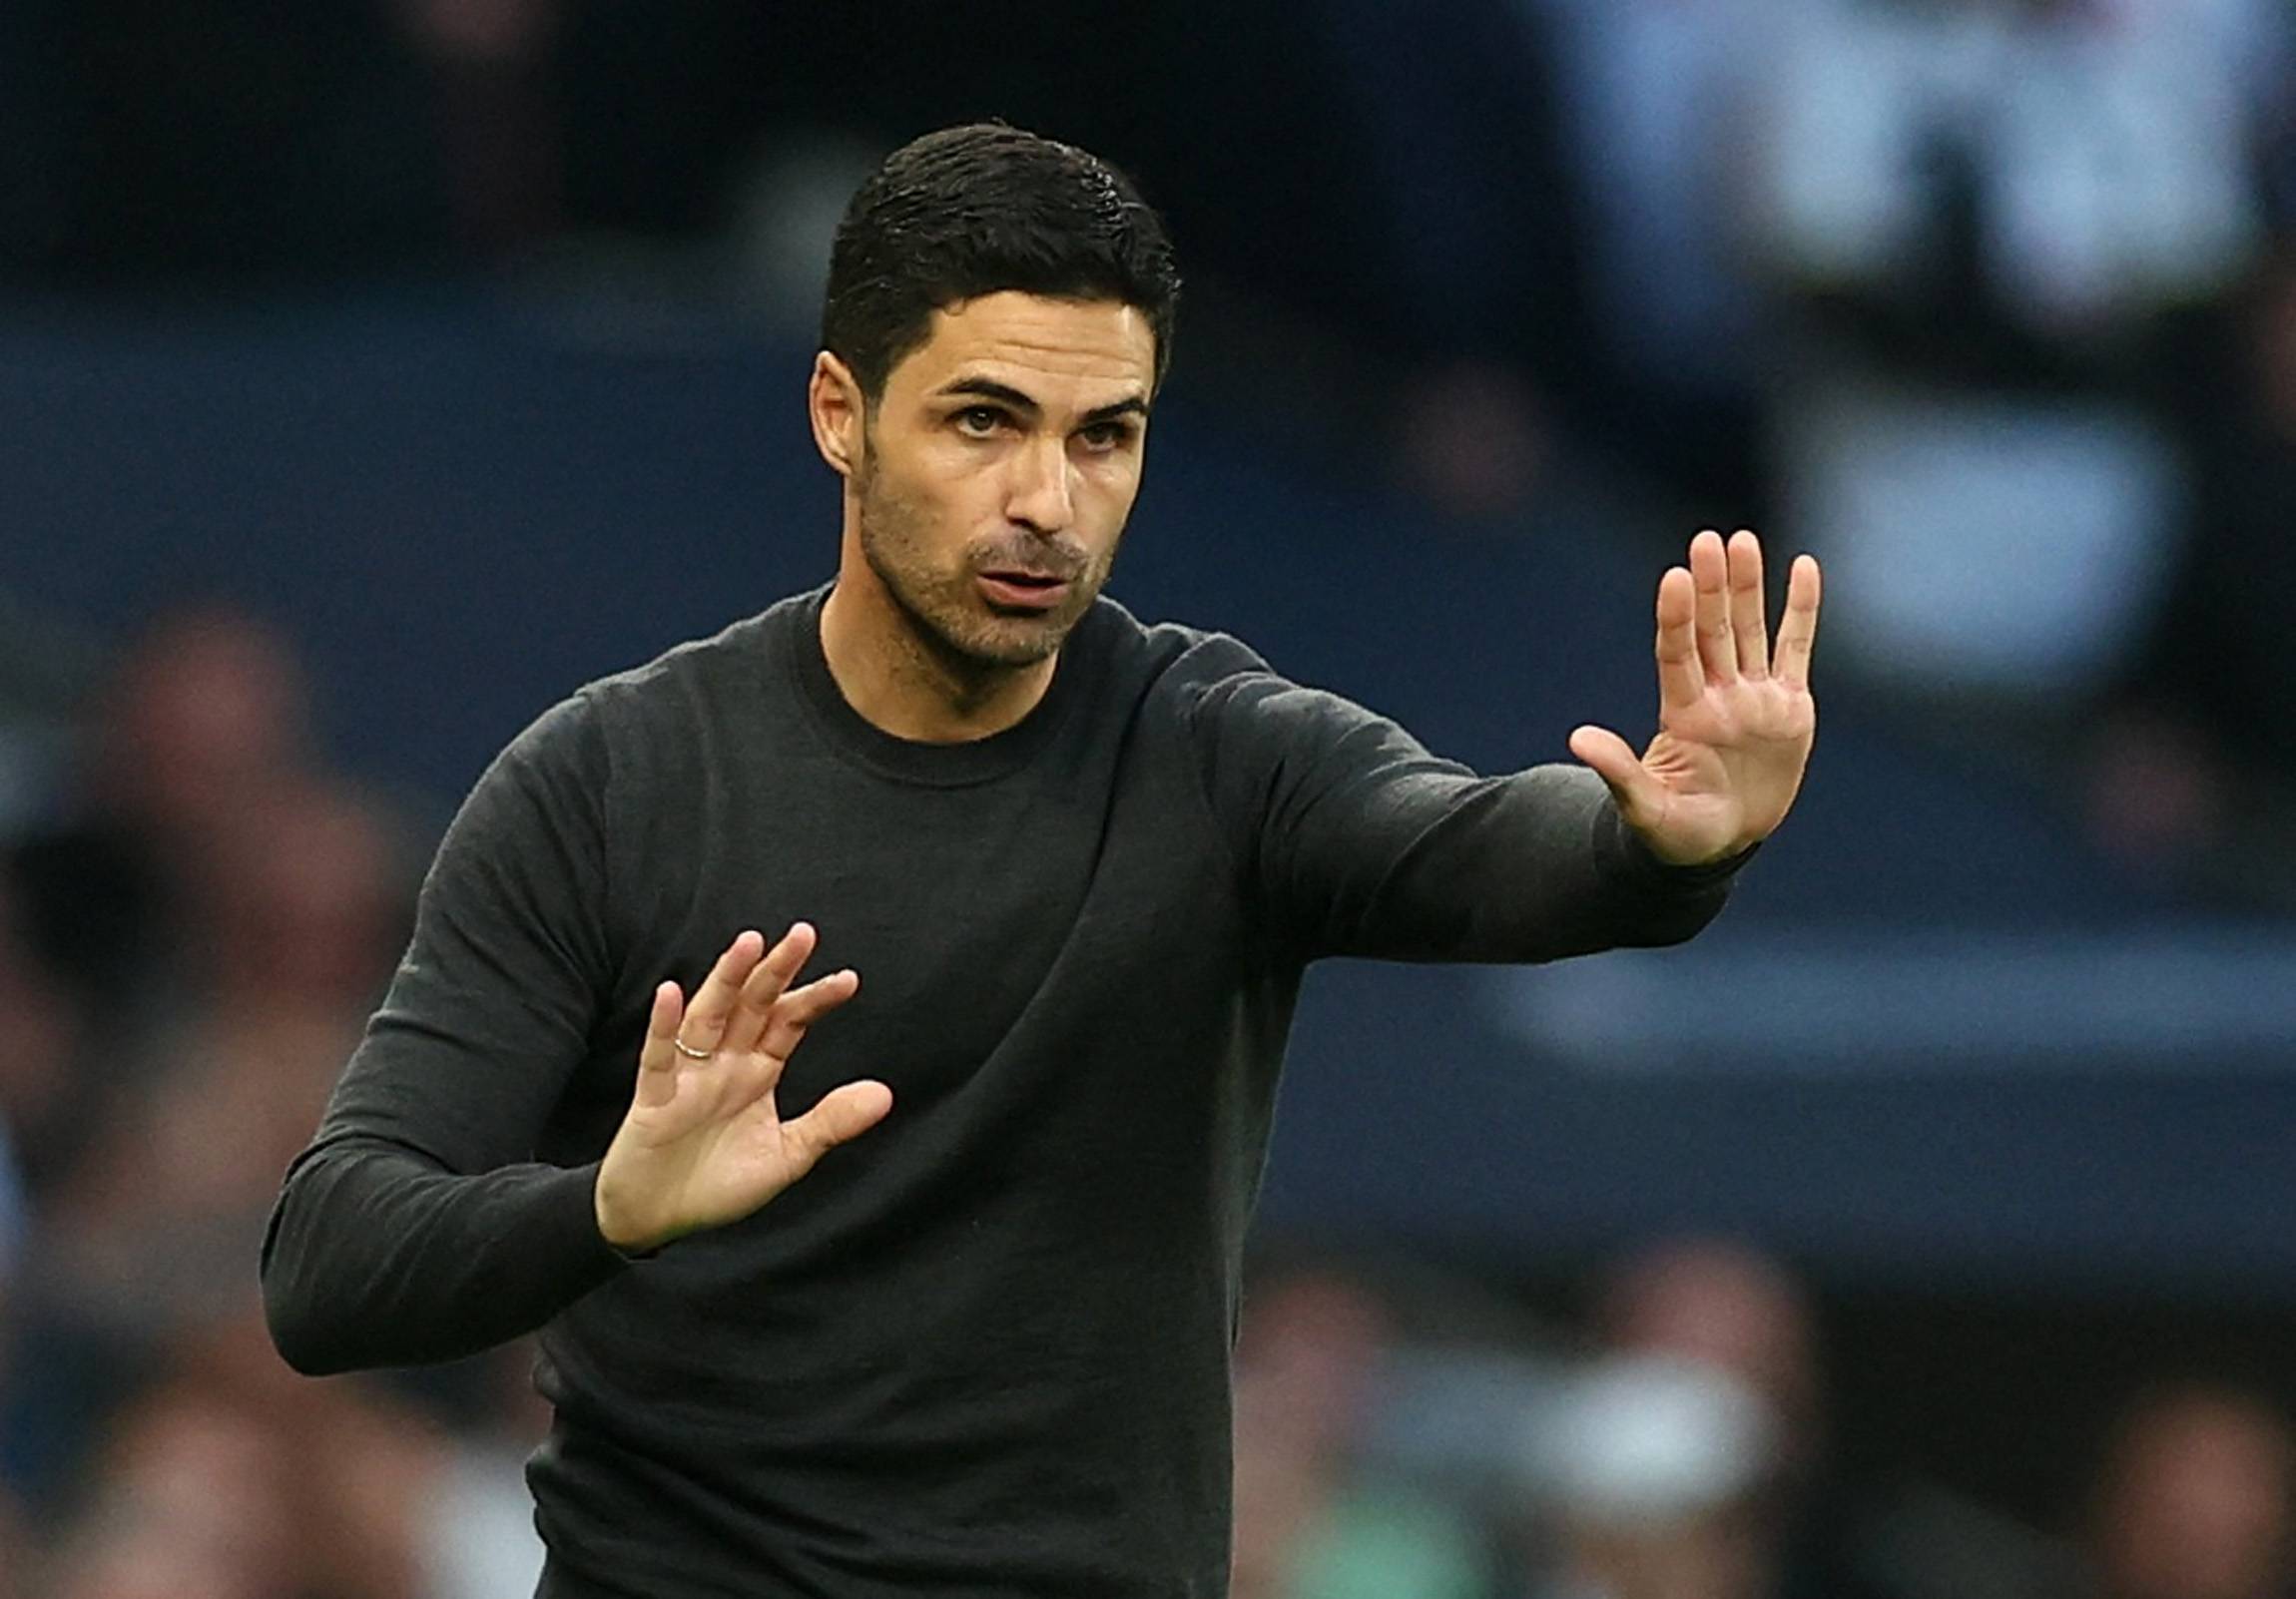 Mikel Arteta was not happy at all with the officials in his interview after Tottenham 3-0 Arsenal.